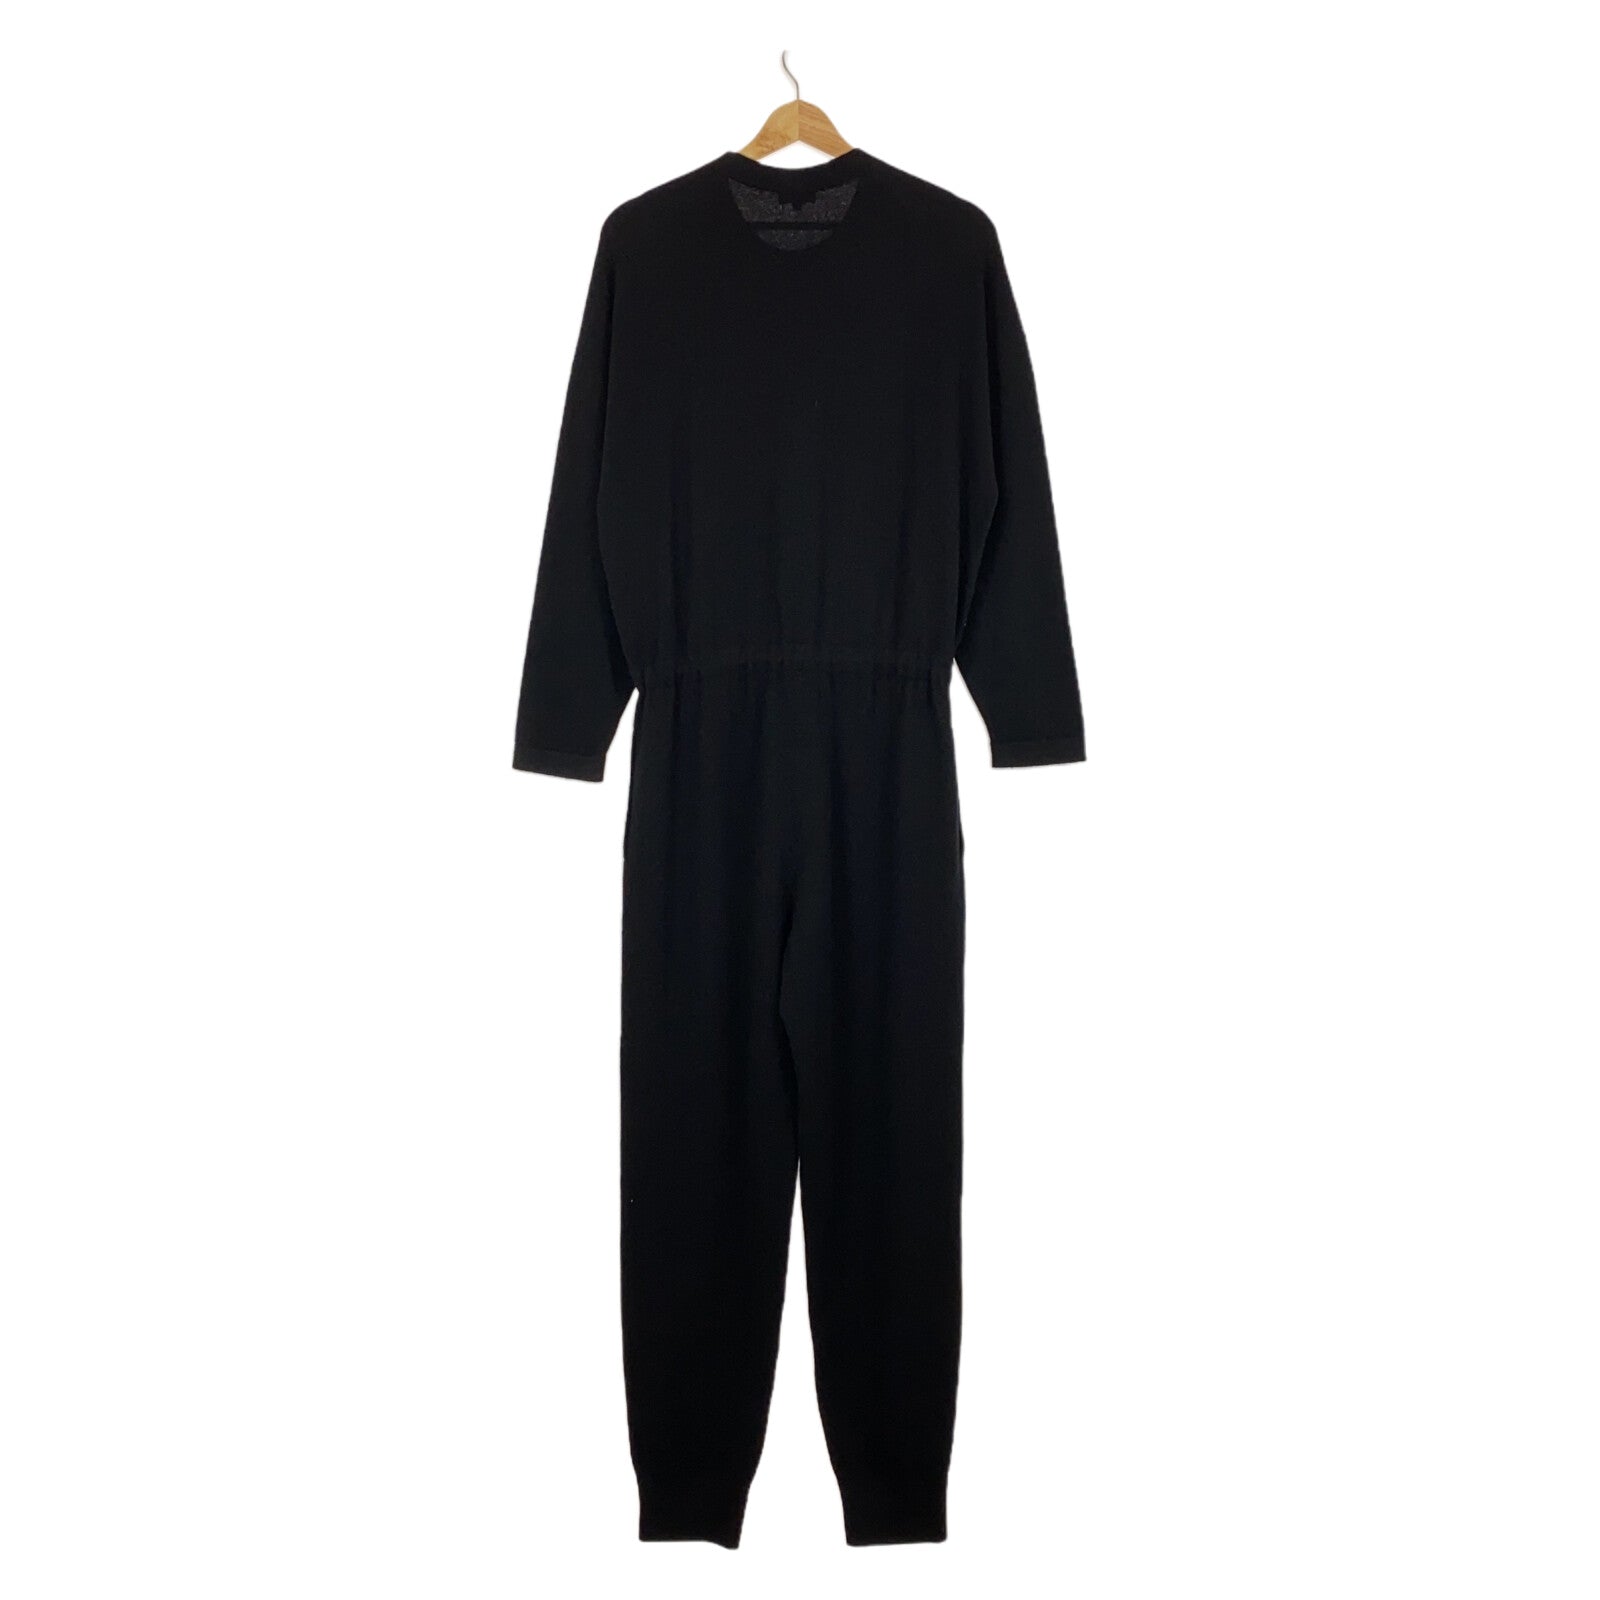 CHANEL Jump Suit Overall  Cashmere  Black P64648K60665